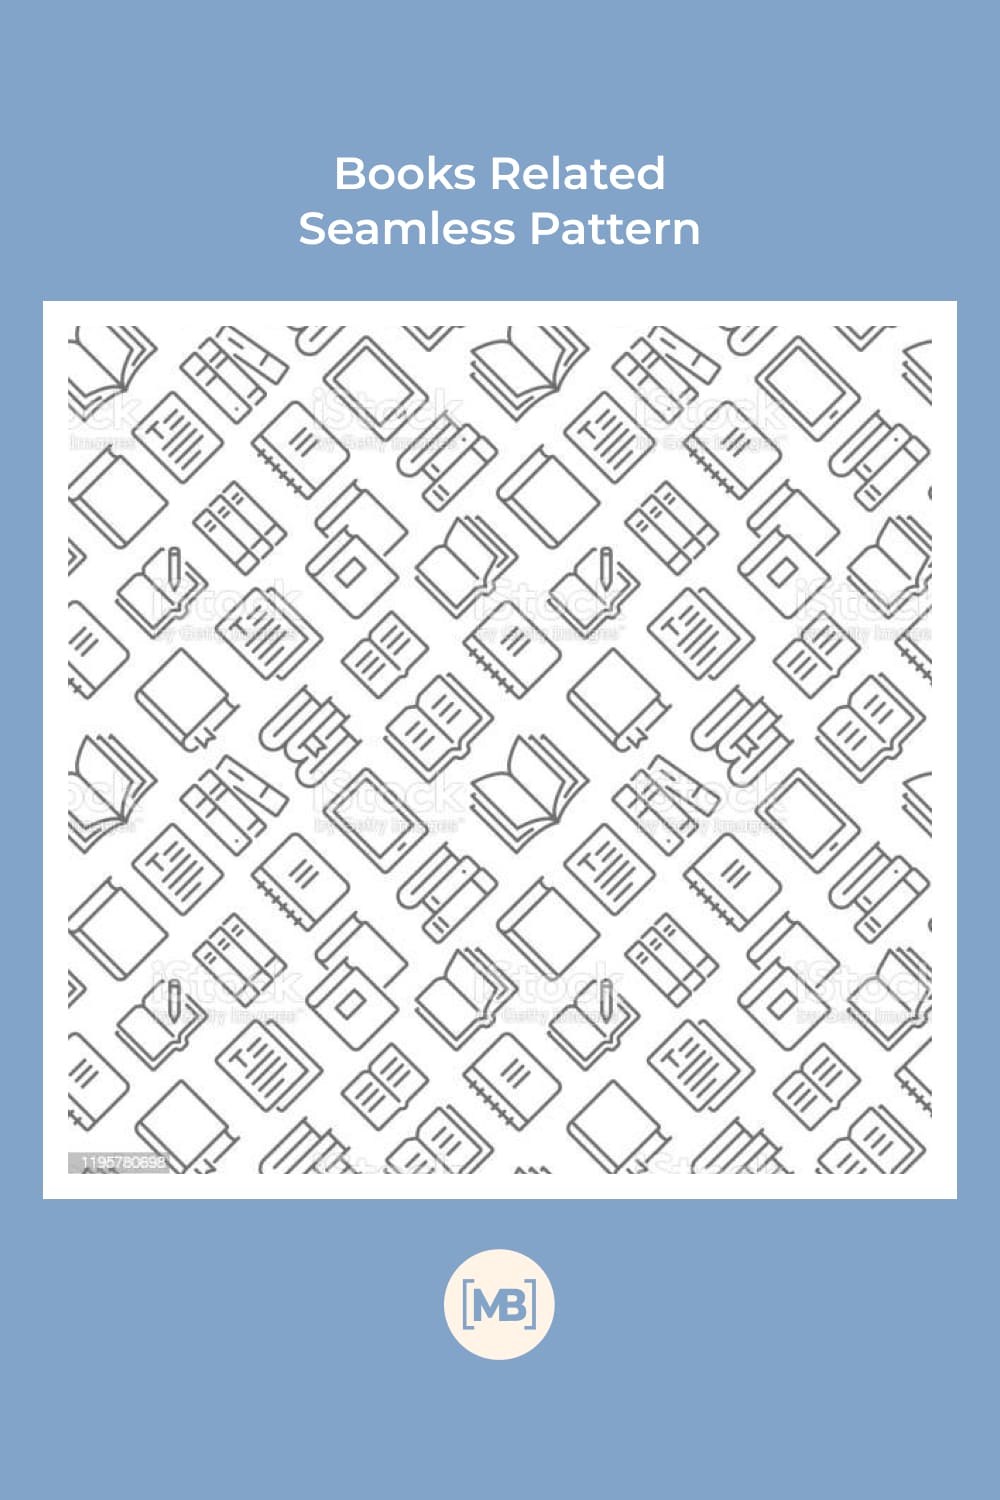 Books related seamless pattern.